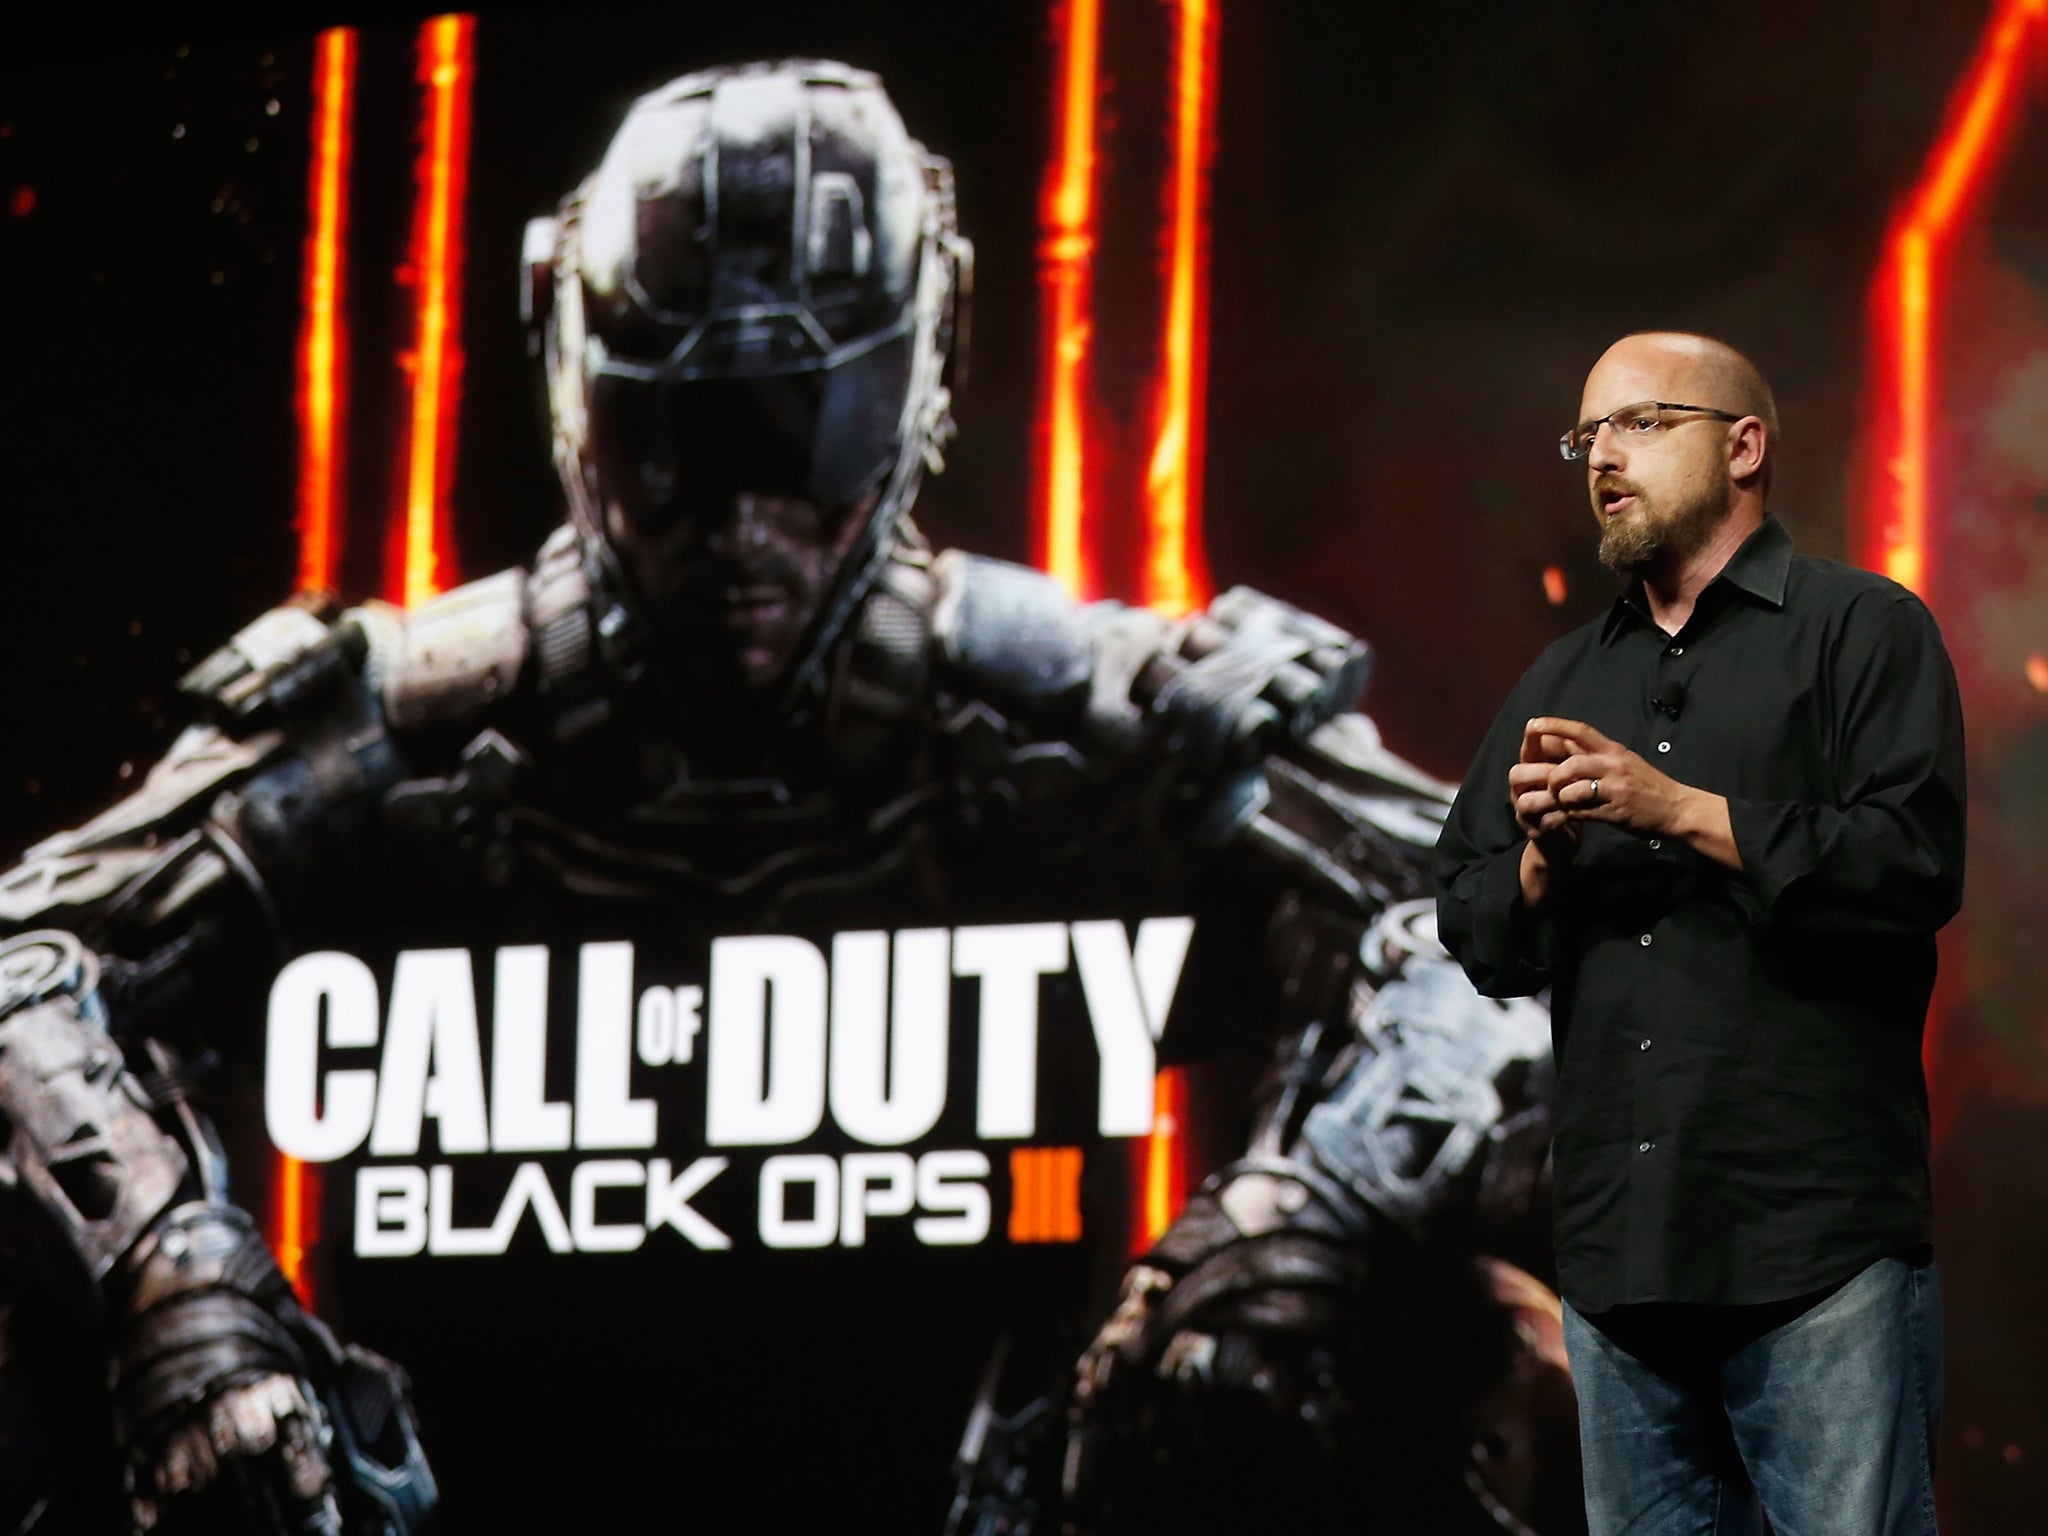 Treyarch's Game Designer Director, David Vonderhaar introduces 'Call of Duty Black Ops 2' during the Sony E3 press conference at the L.A. Memorial Sports Arena on June 15, 2015 in Los Angeles, California